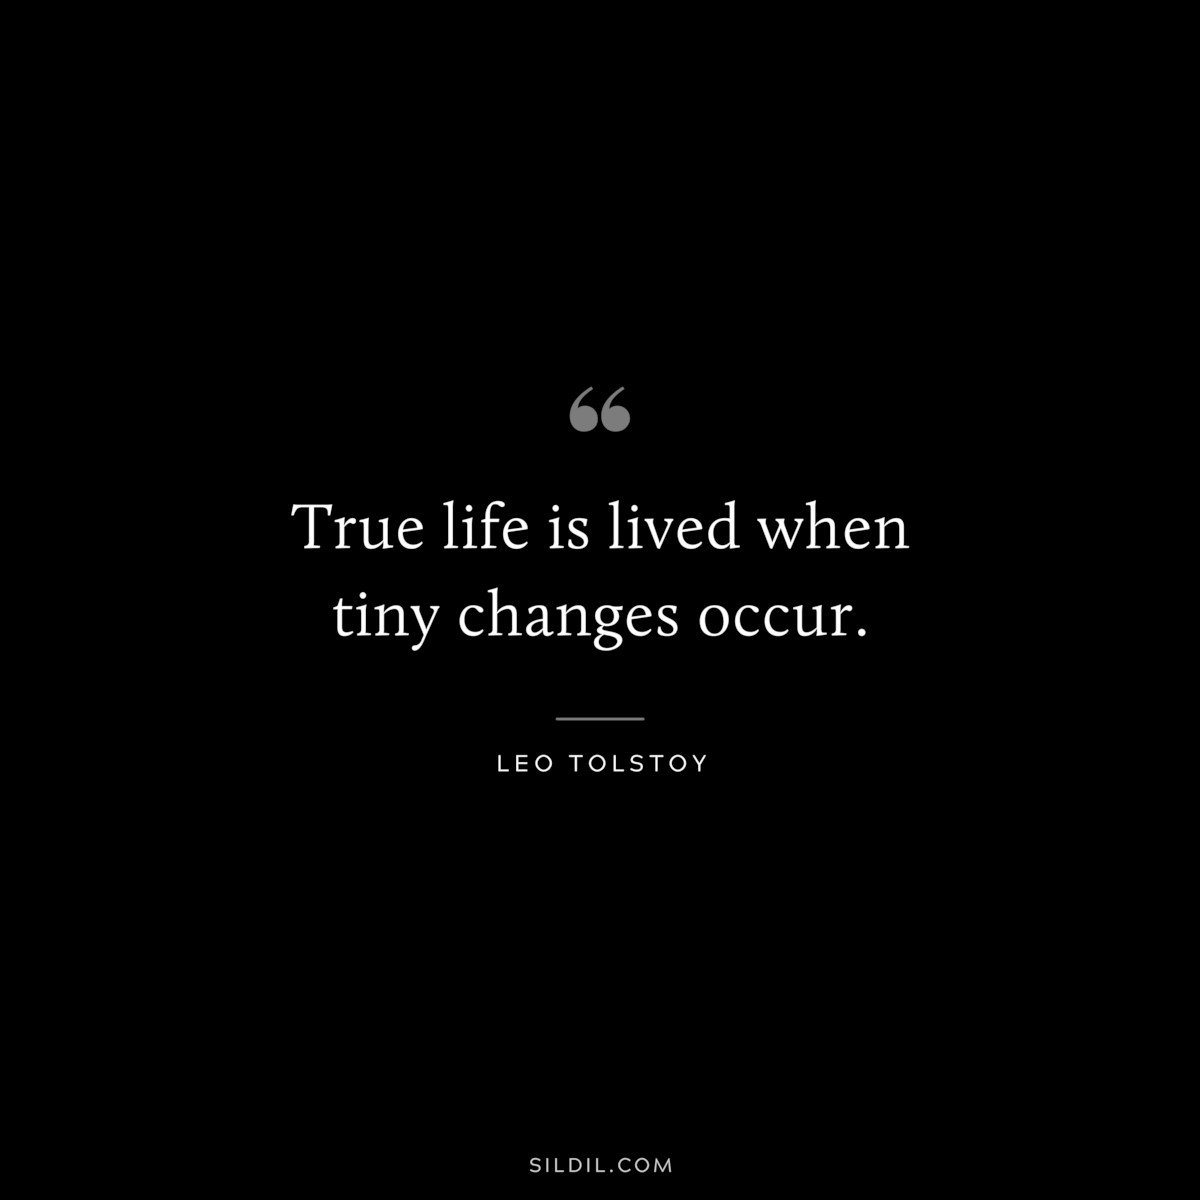 True life is lived when tiny changes occur. ― Leo Tolstoy